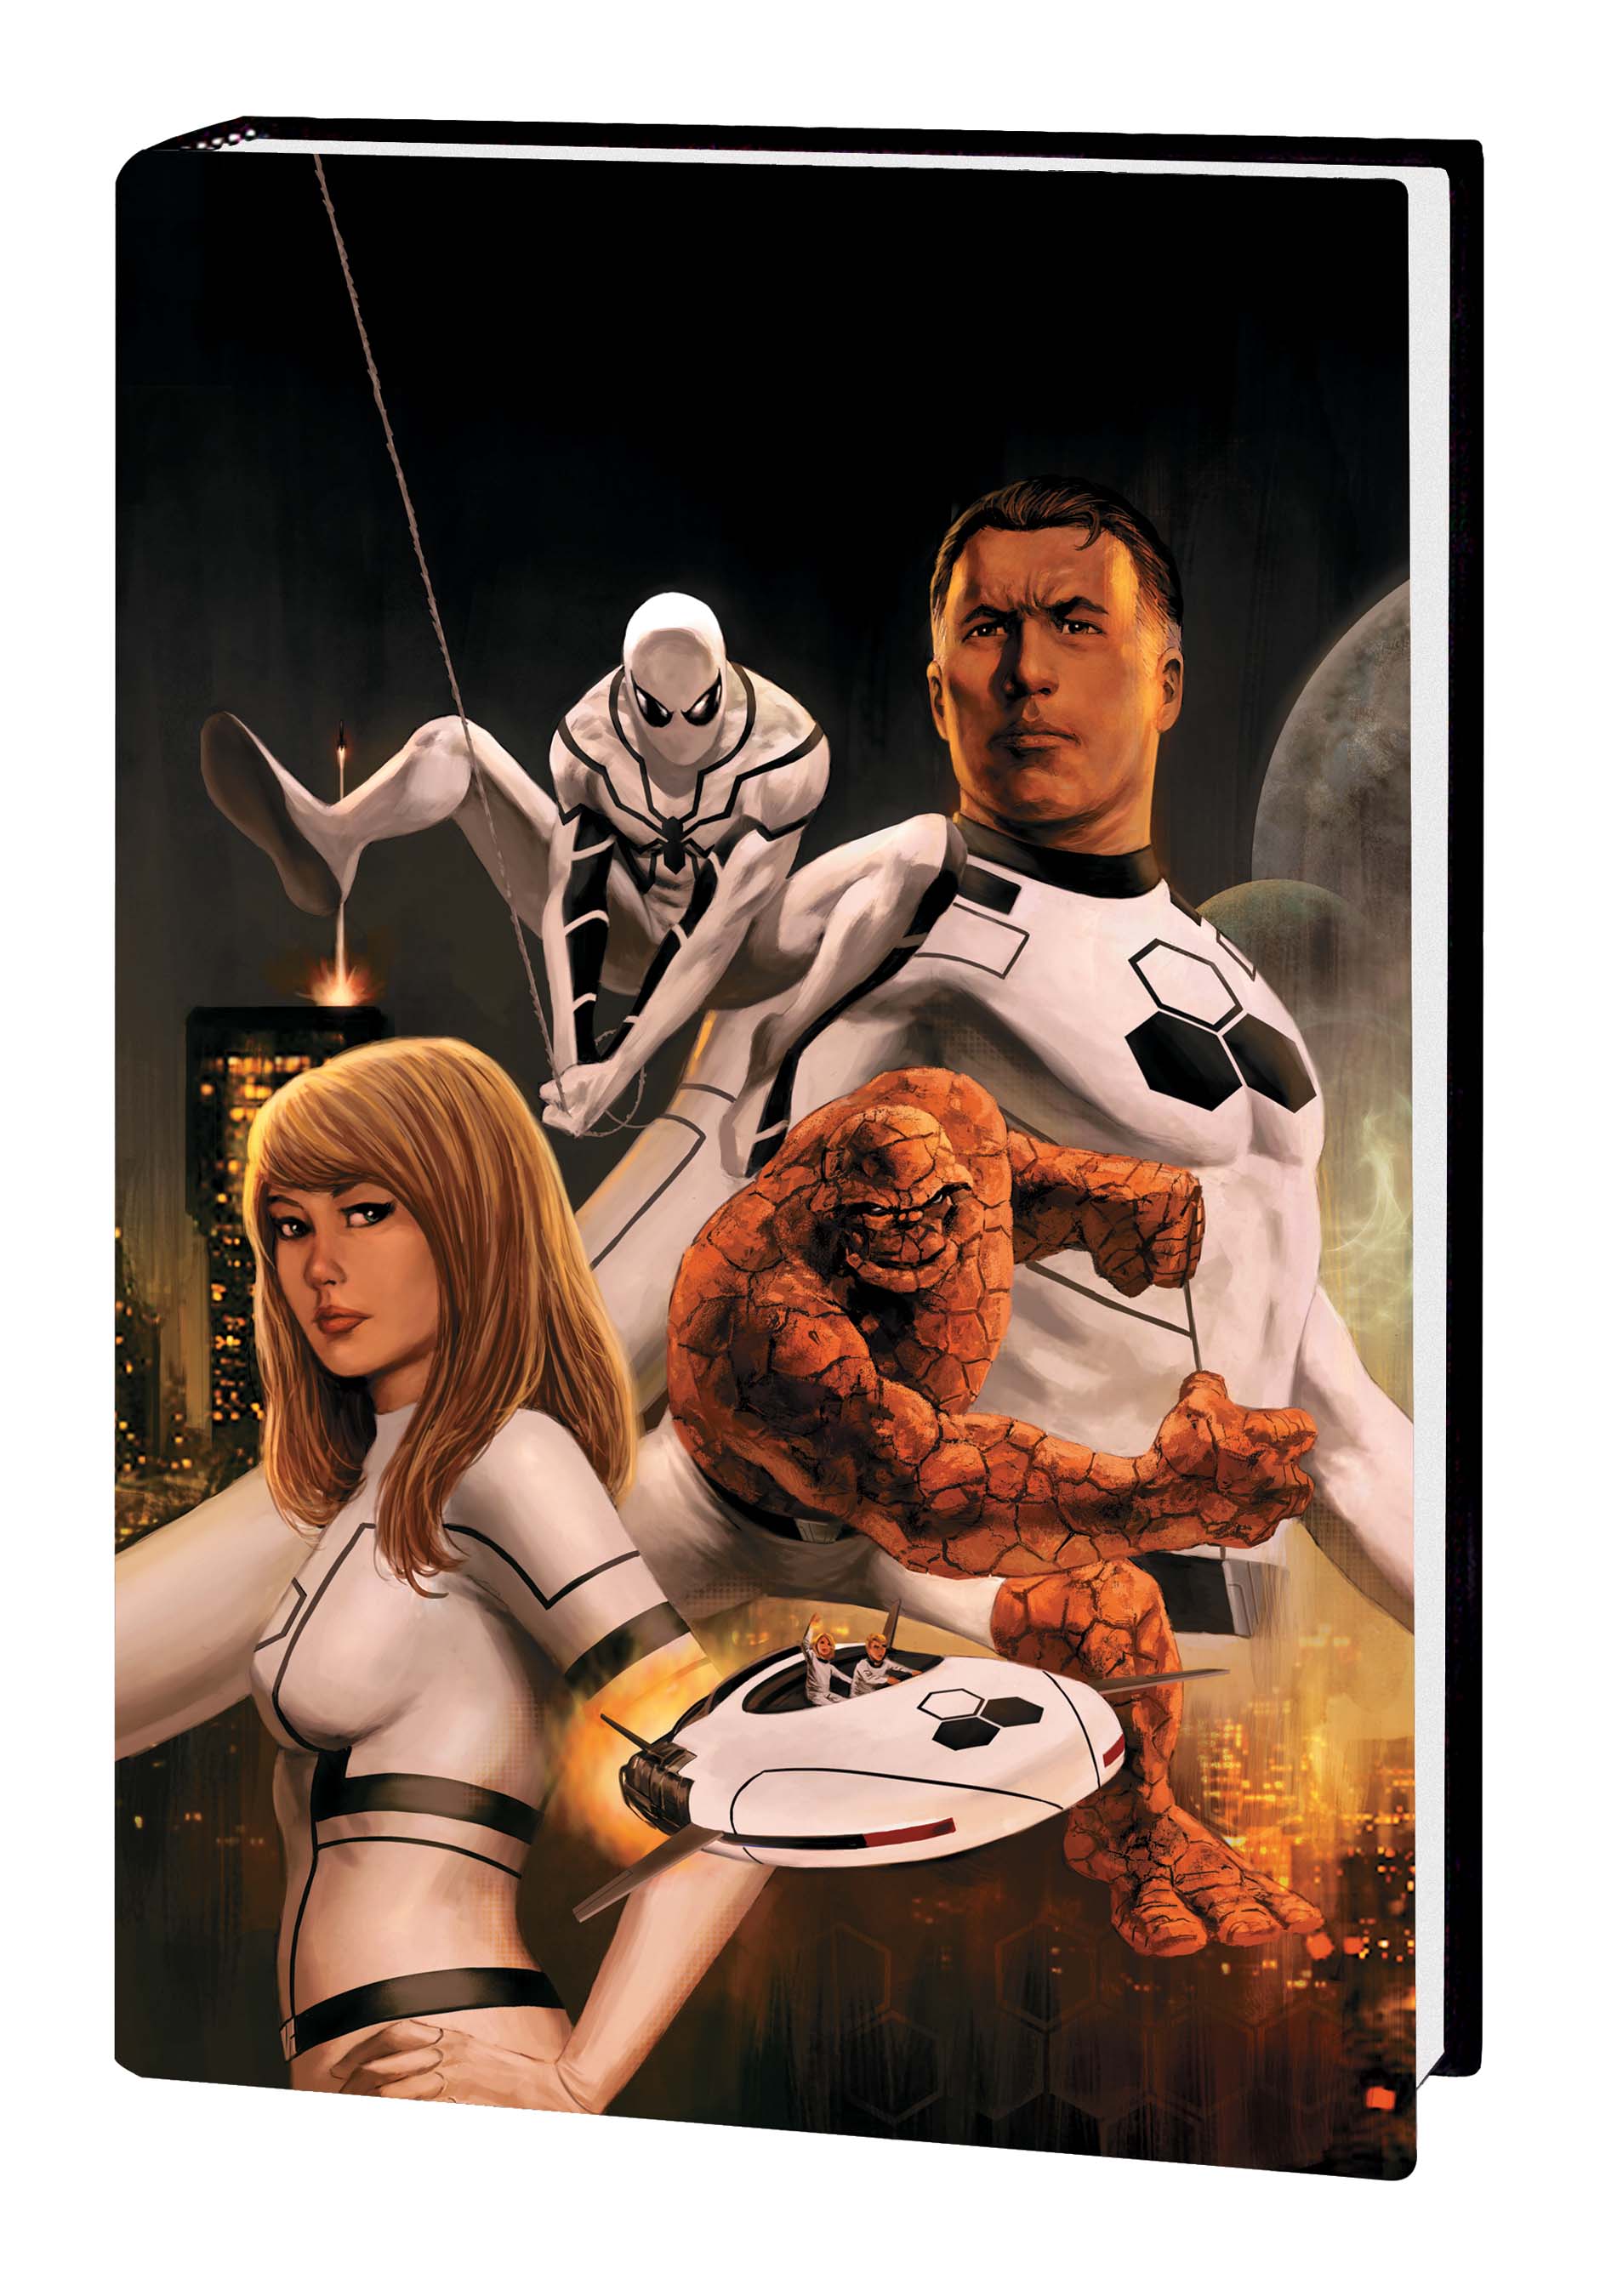 FF BY JONATHAN HICKMAN VOL. 1 PREMIERE HC ACUNA COVER [DM ONLY] (Hardcover)